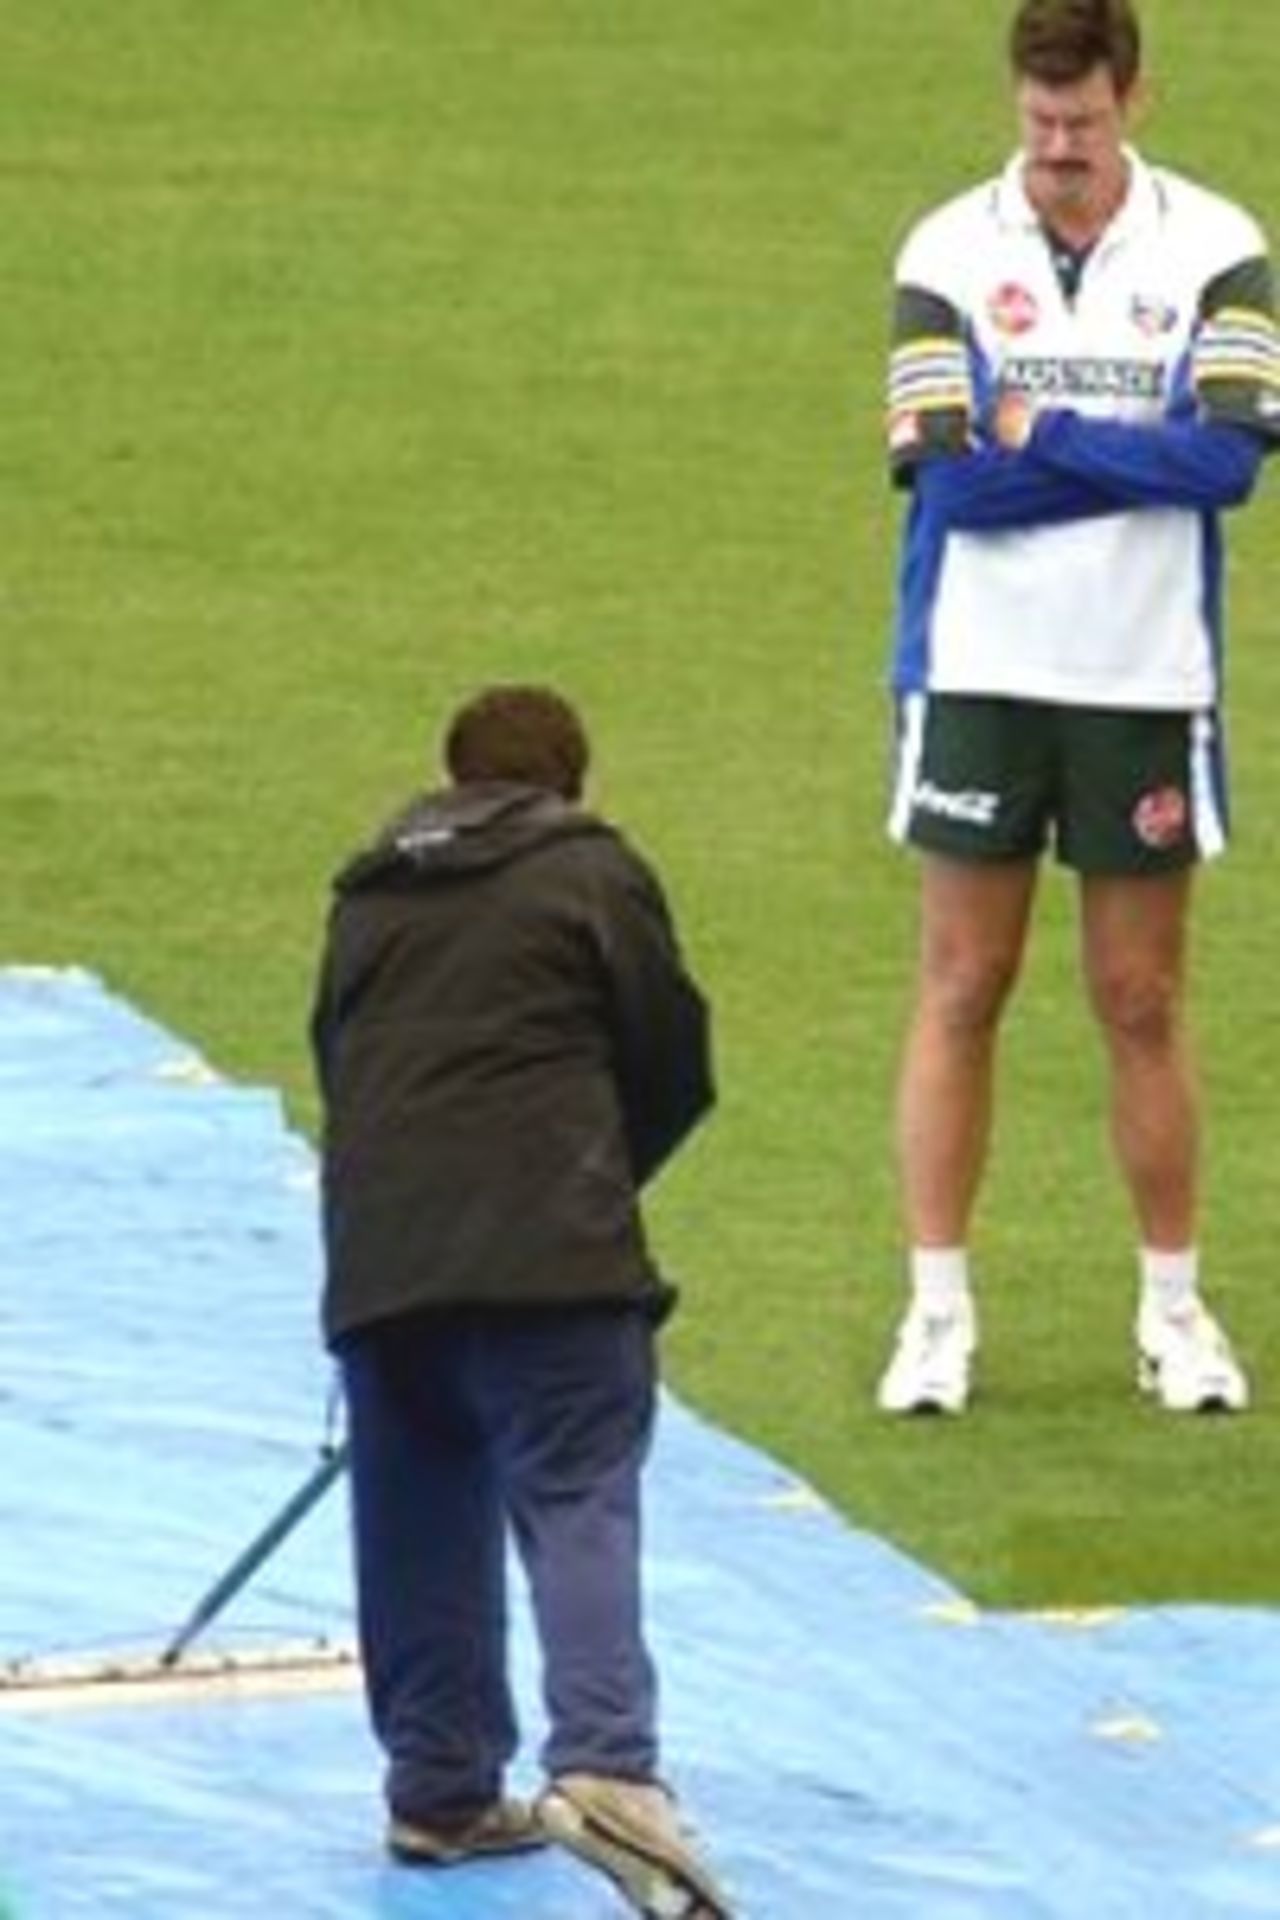 16 Feb 2000: Australian coach John Buchanan discusses the rain and wet ground while a ground attendant attempts to dry the ground, before the first one day international between Australia and New Zealand was abandonned at WestpacTrust Stadium, Wellington, New Zealand.